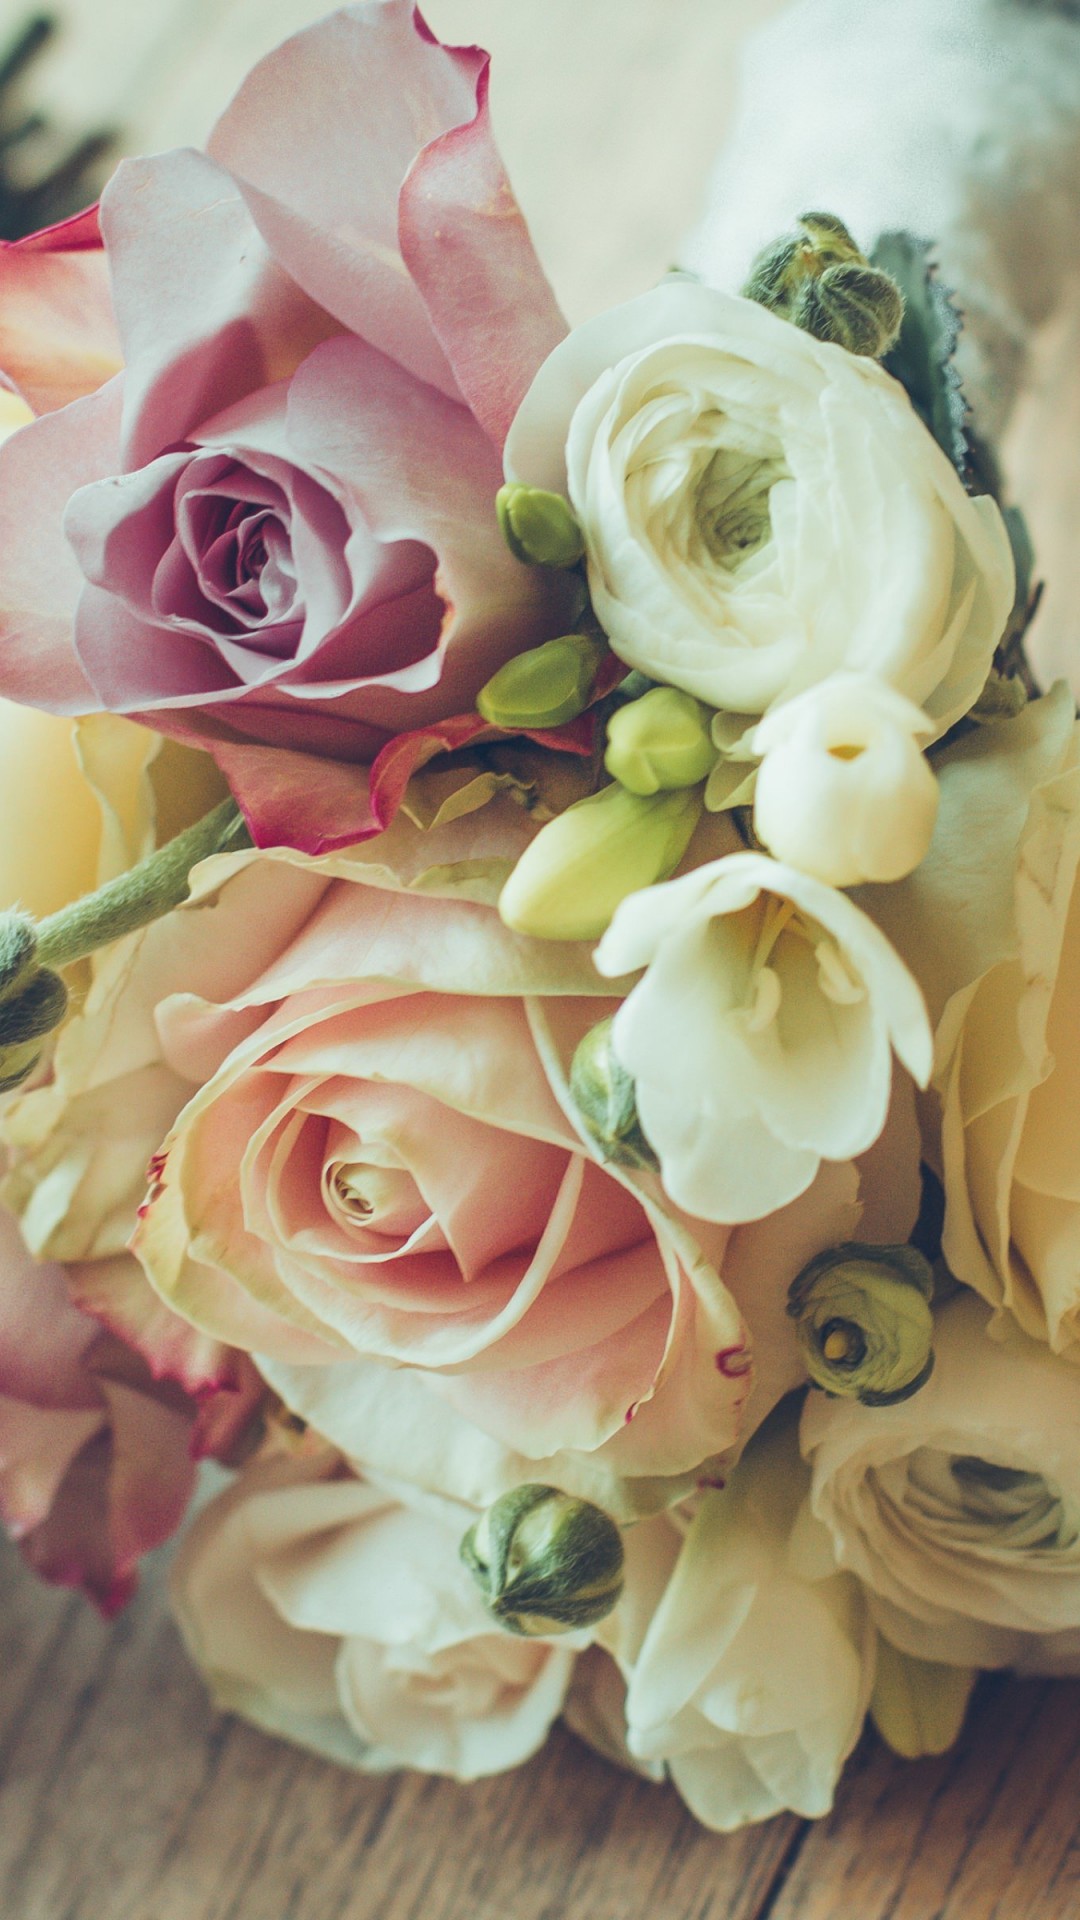 Roses Bouquet Composition Wallpaper for SAMSUNG Galaxy Note 3